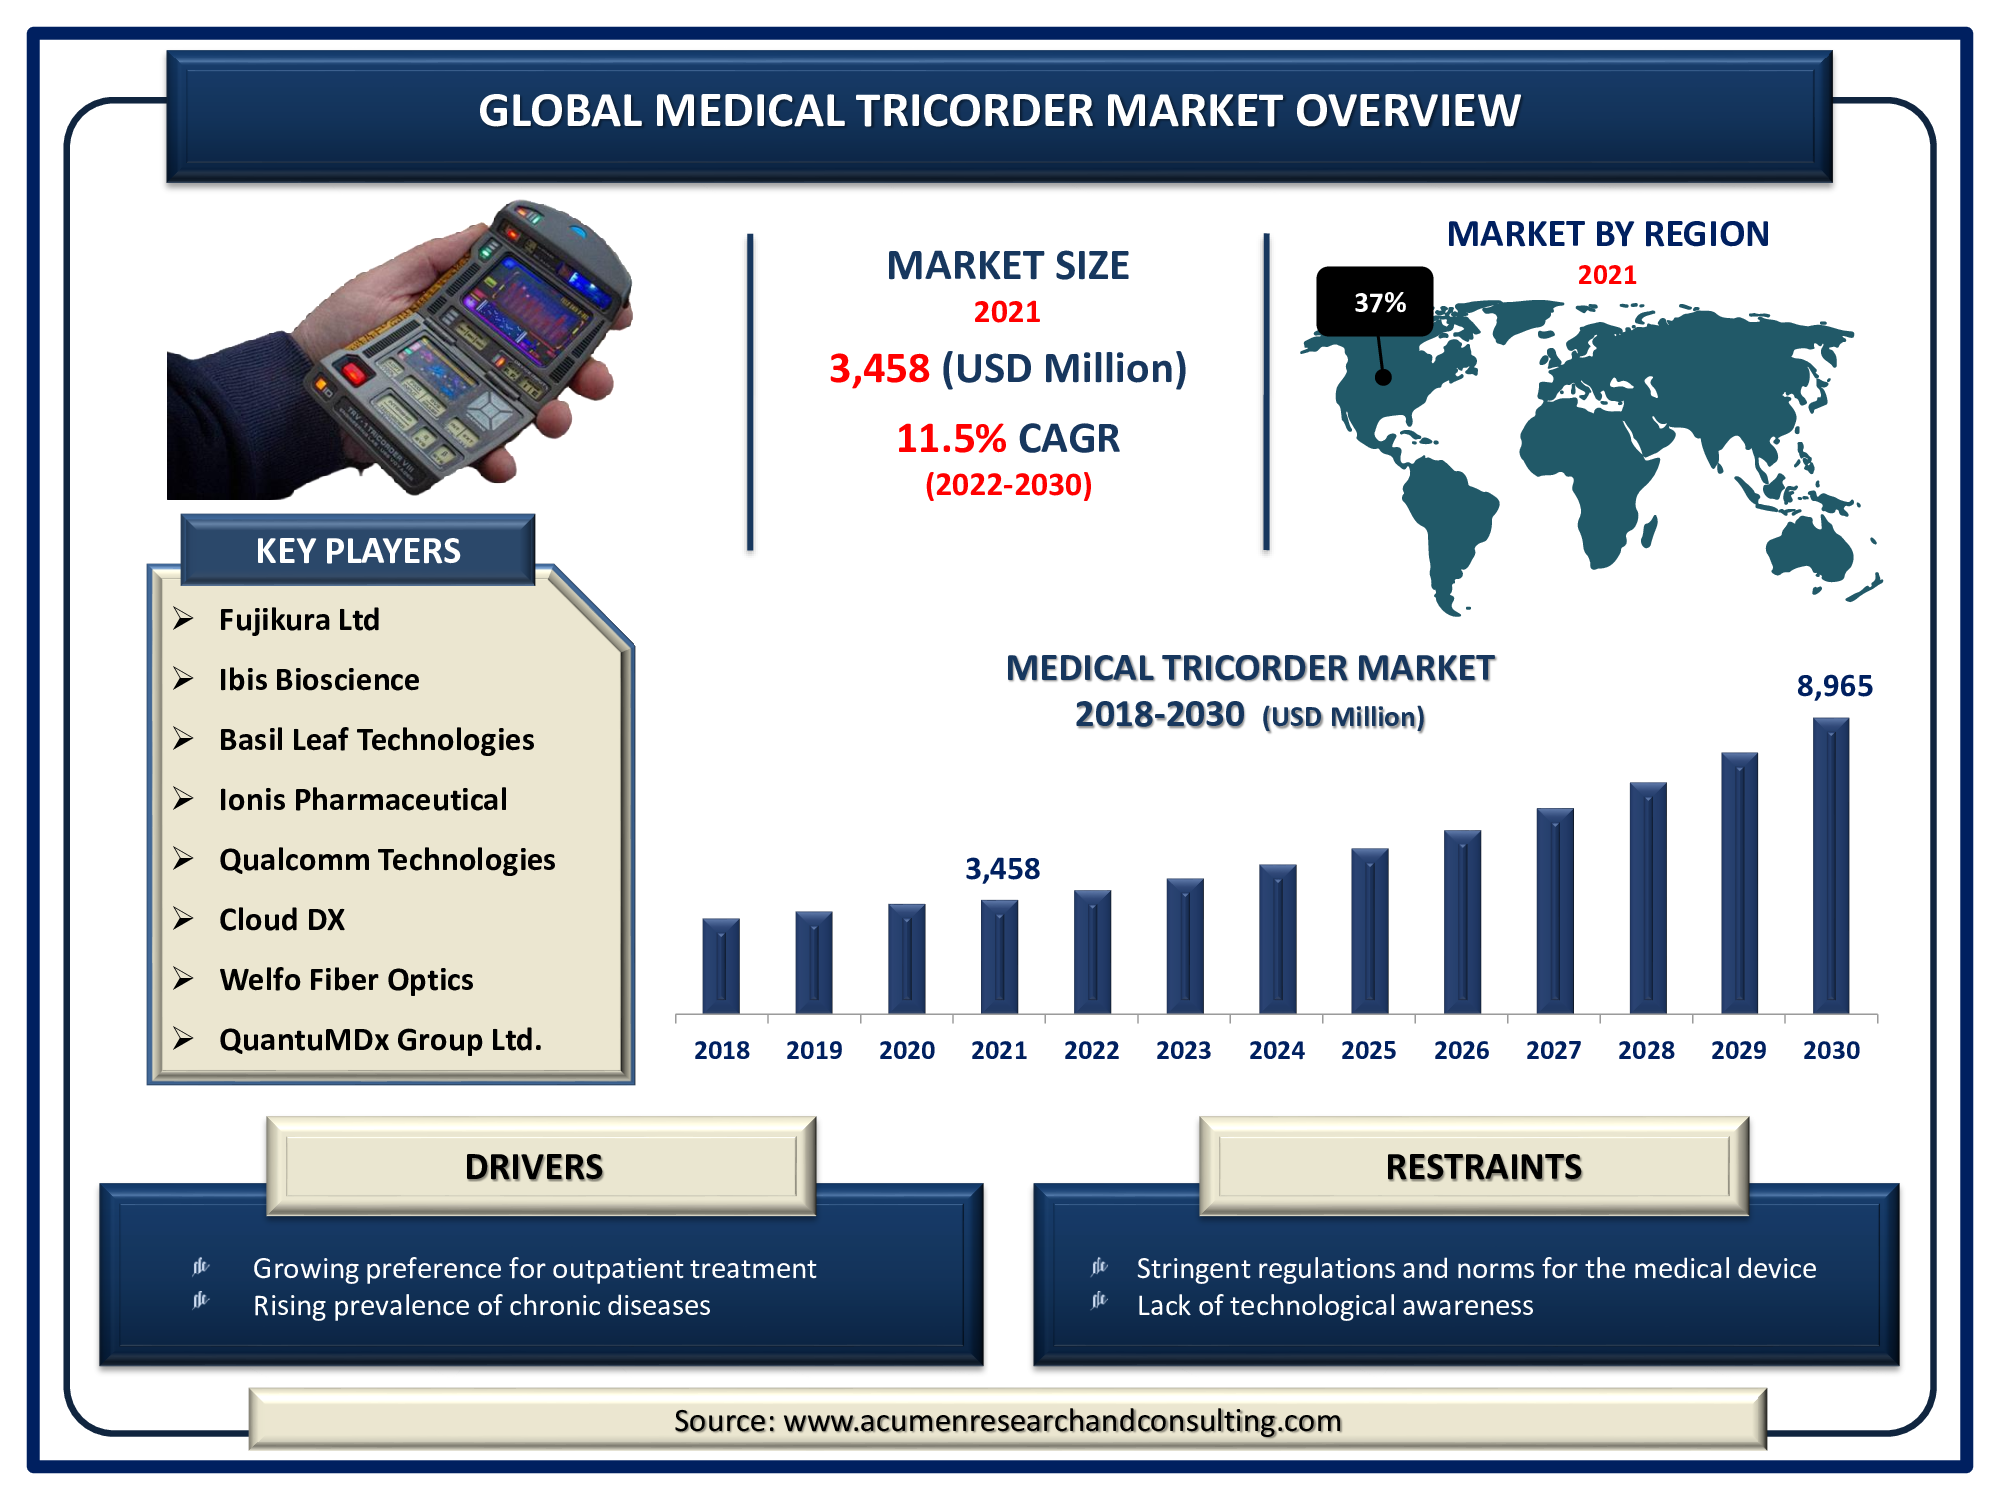 Medical Tricorder Market is expected to reach the market value of USD 8,965 Million by 2030 at a CAGR of 11.5%